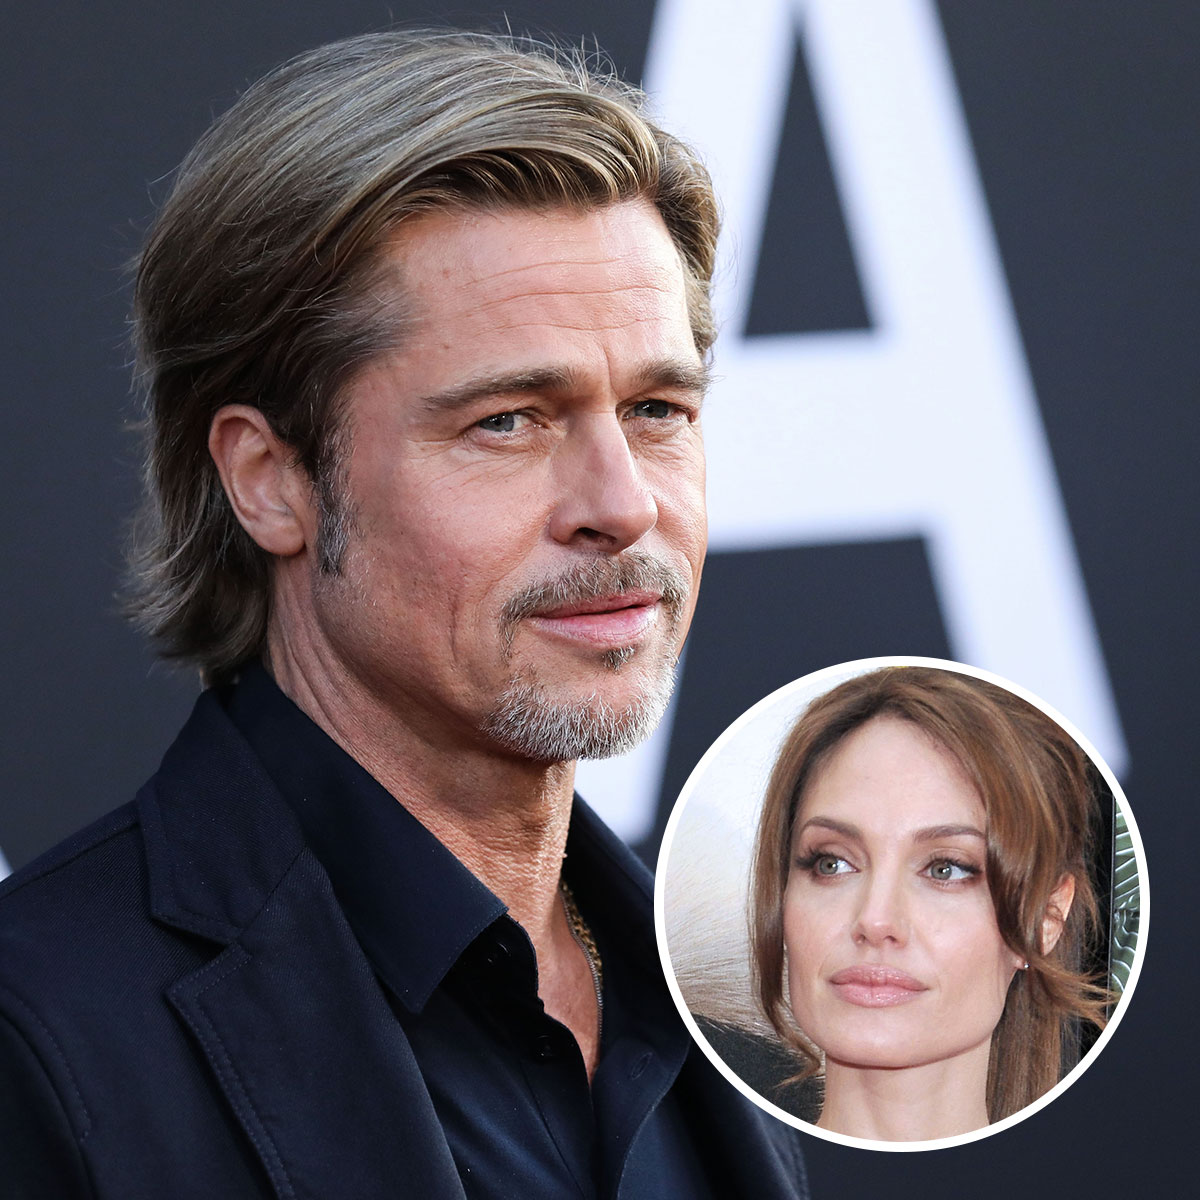 The Evolution of Brad Pitt and Angelina Jolie's Style